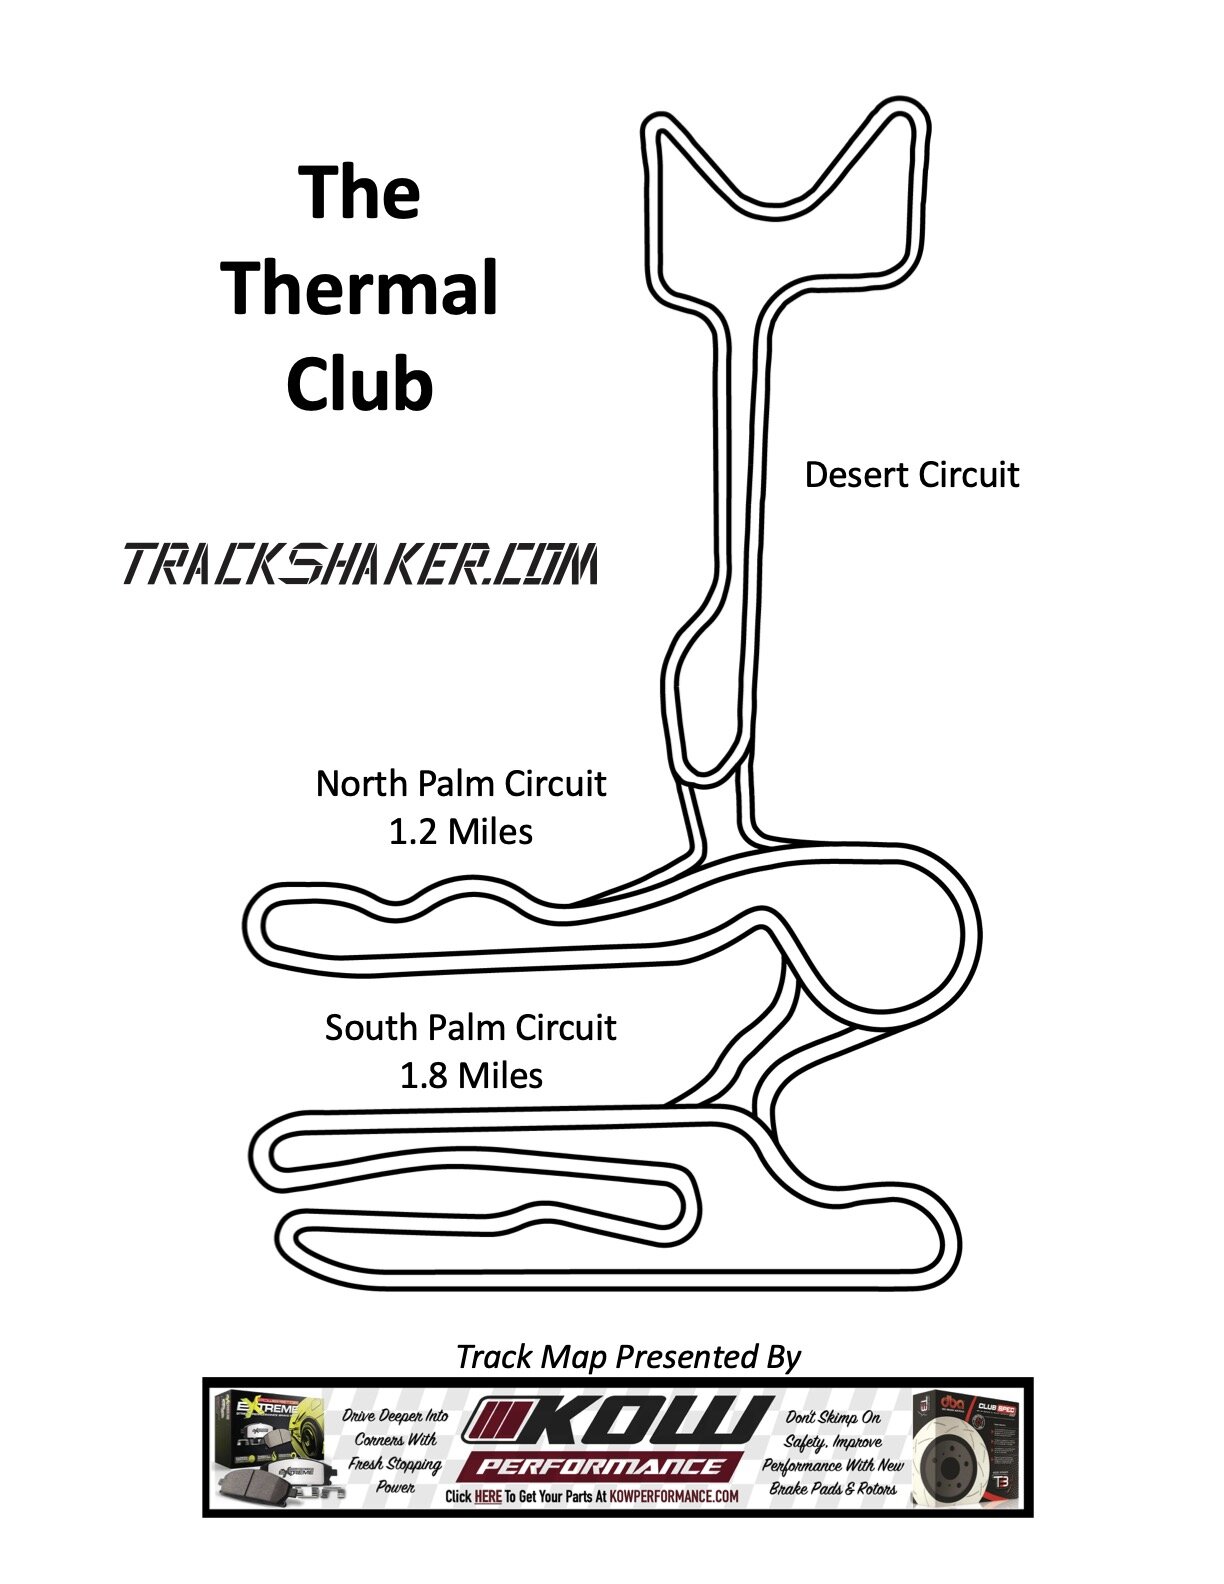 ThermalClubPic.jpg